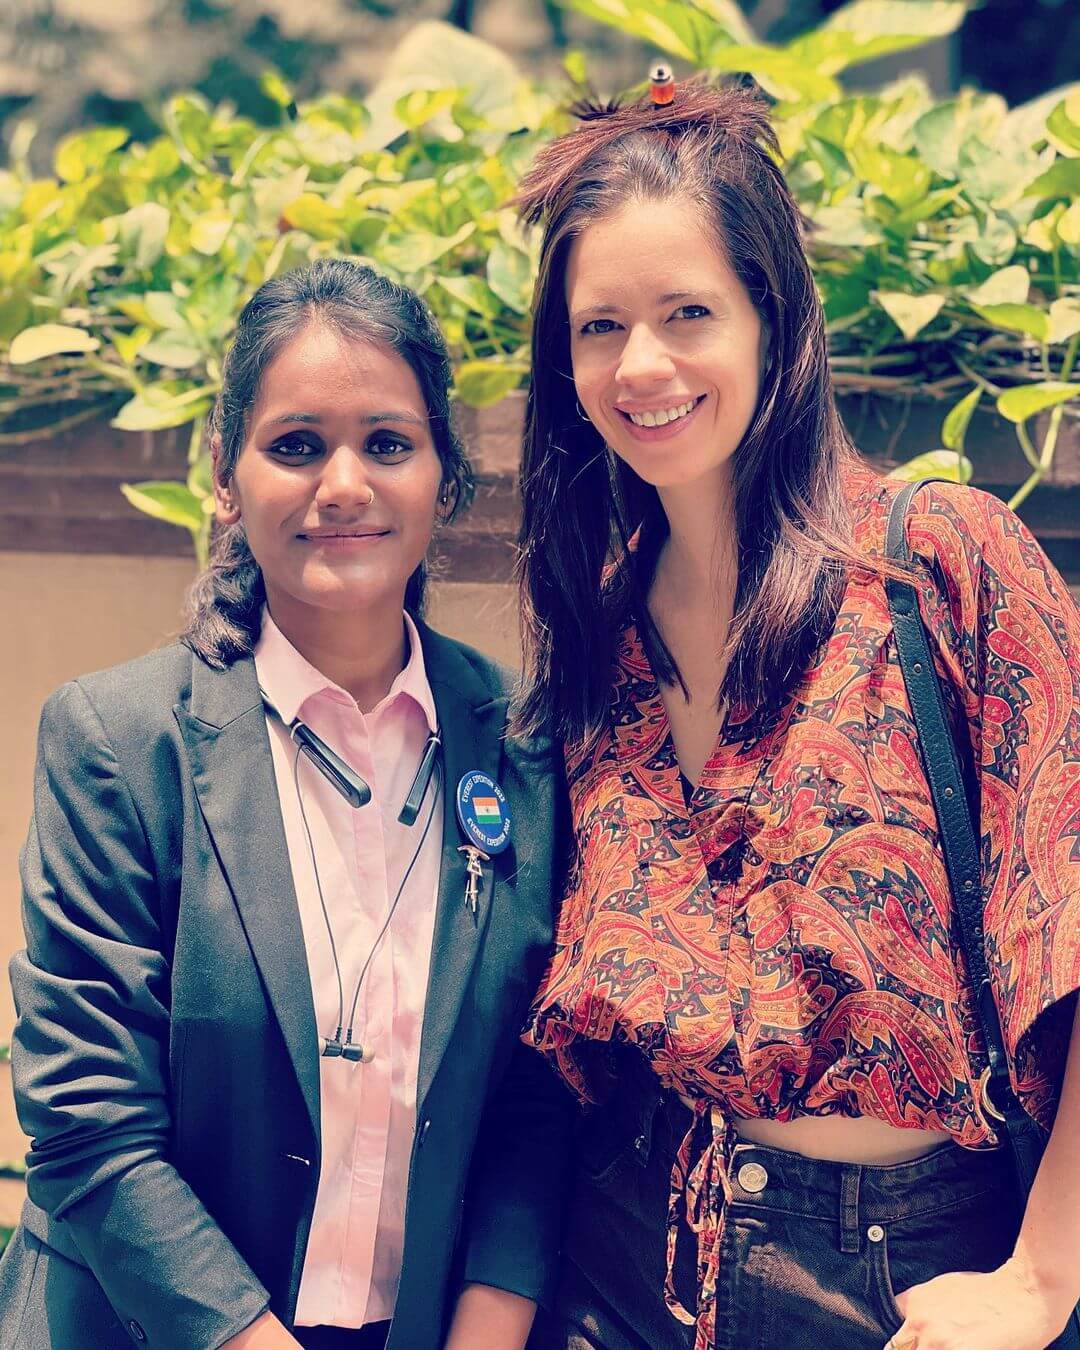 Trendy And Amazing Bollywood Fashion Kalki Koechlin With Savita Kanswal In Pink Top And Denim Jeans